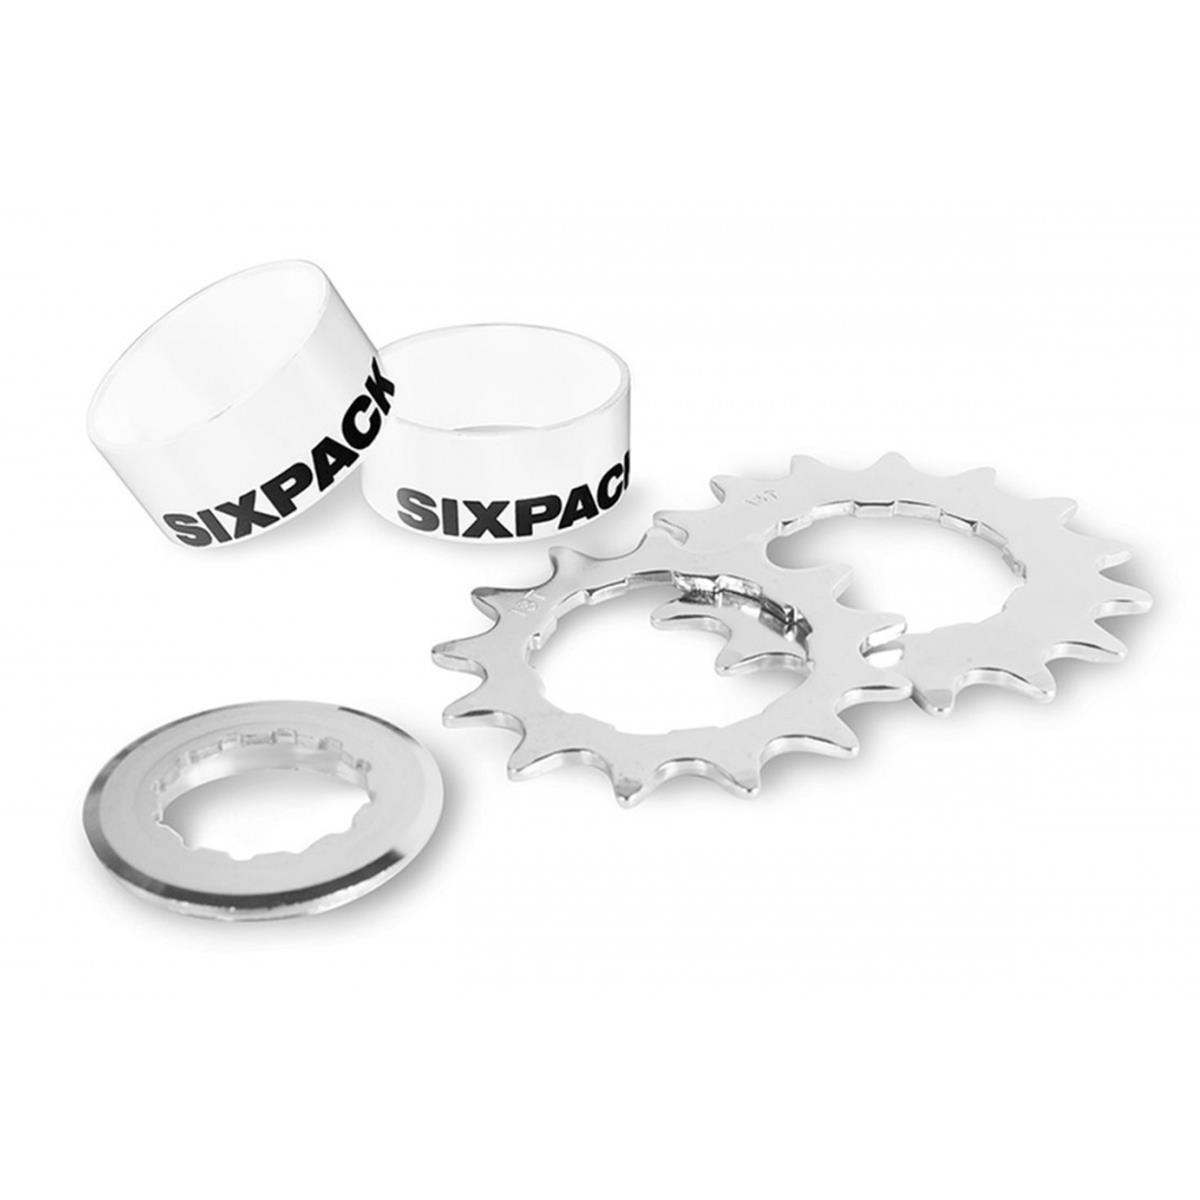 Sixpack Singlespeed Conversion Kit  White, incl. 2 Chainrings (13 & 15T), fits 8/9710-speed Shimano/Sram Freewheels